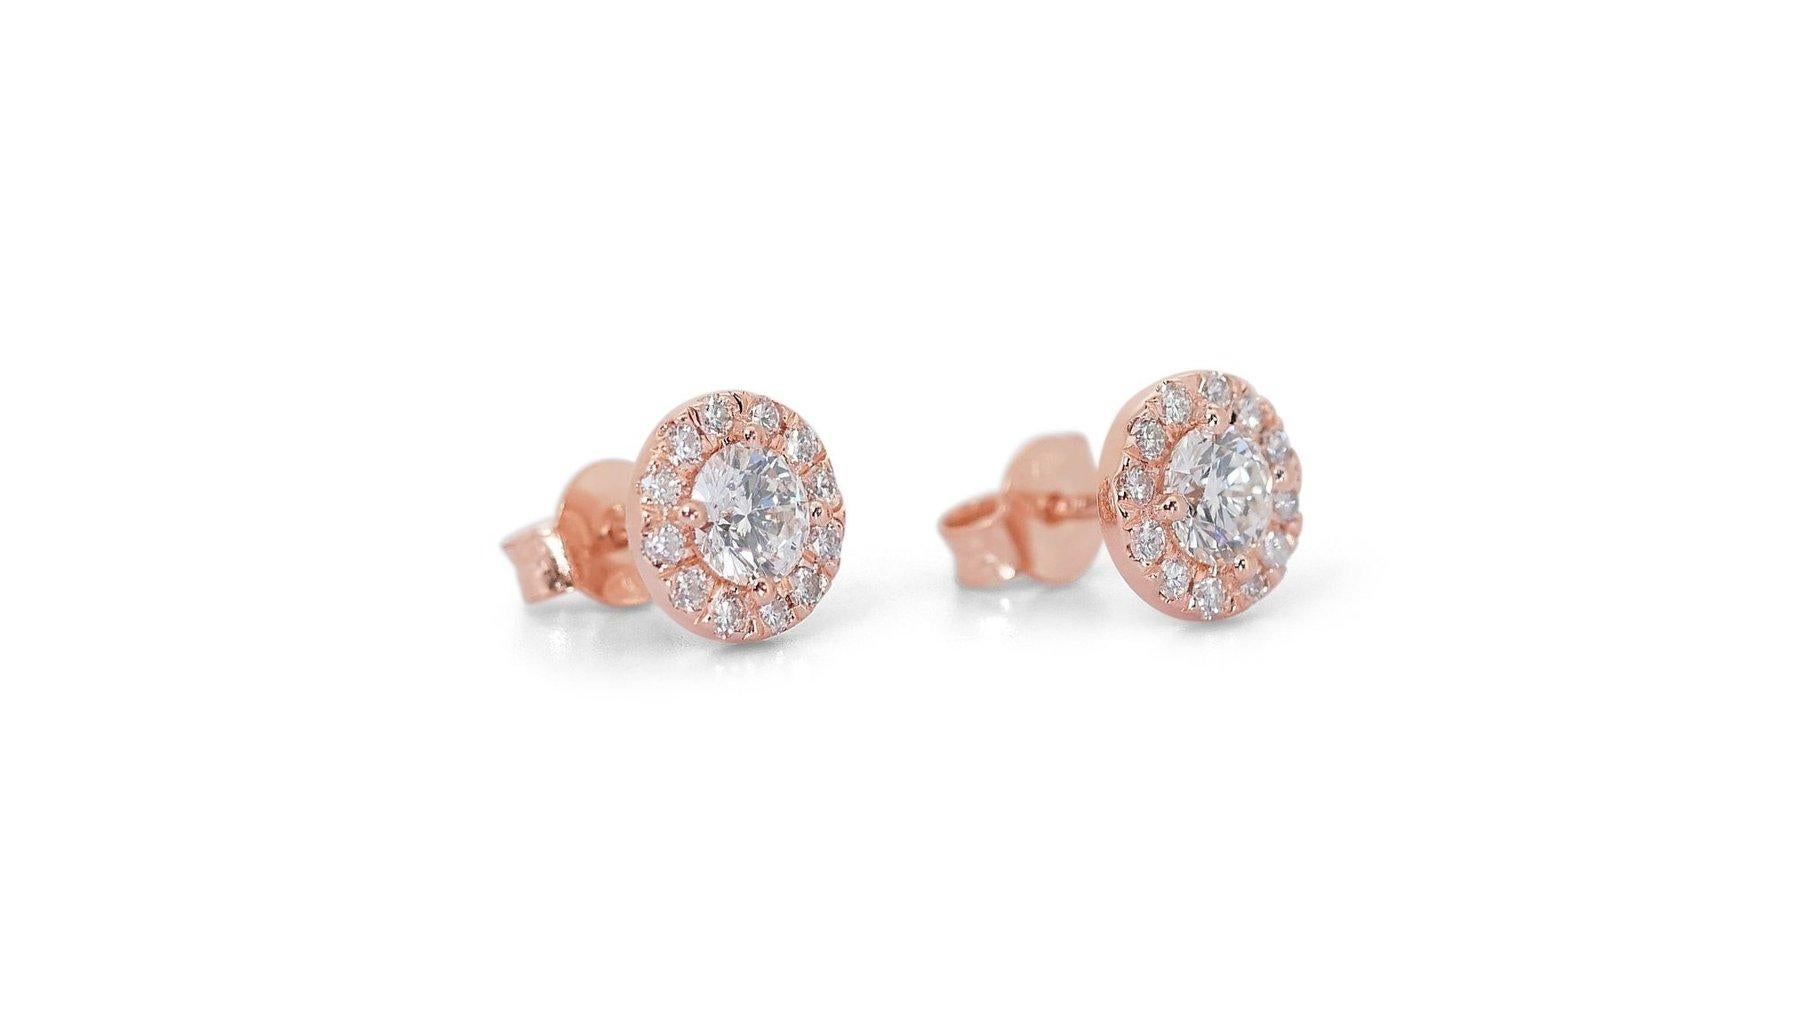 Round Cut Sophisticated 2.31ct Diamonds Halo Stud Earrings in 18k Rose Gold - GIA  For Sale